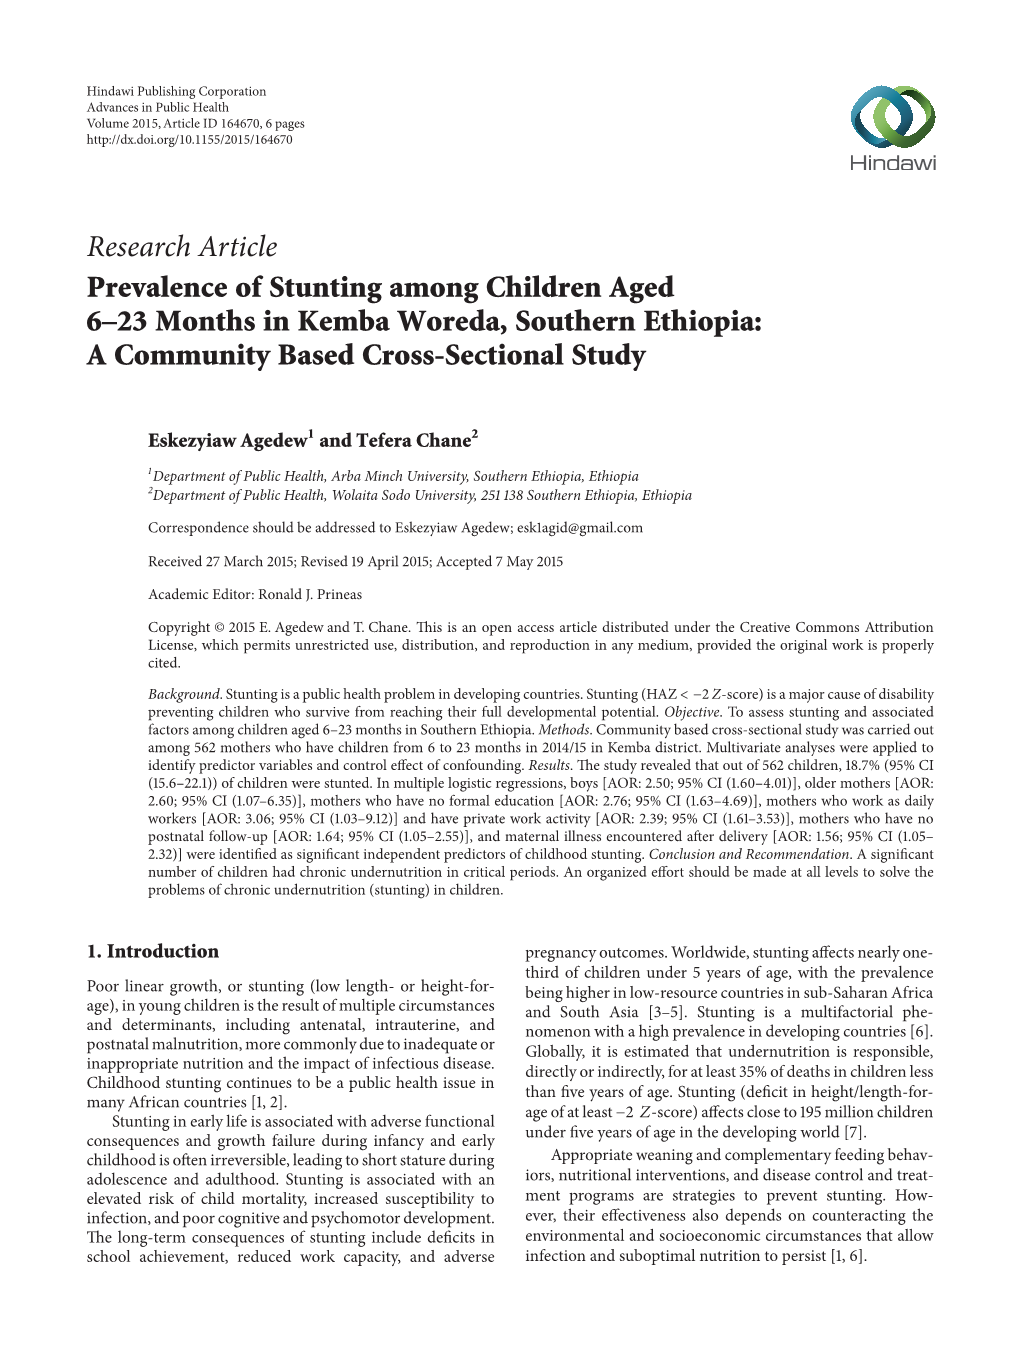 Prevalence of Stunting Among Children Aged 6–23 Months in Kemba Woreda, Southern Ethiopia: a Community Based Cross-Sectional Study